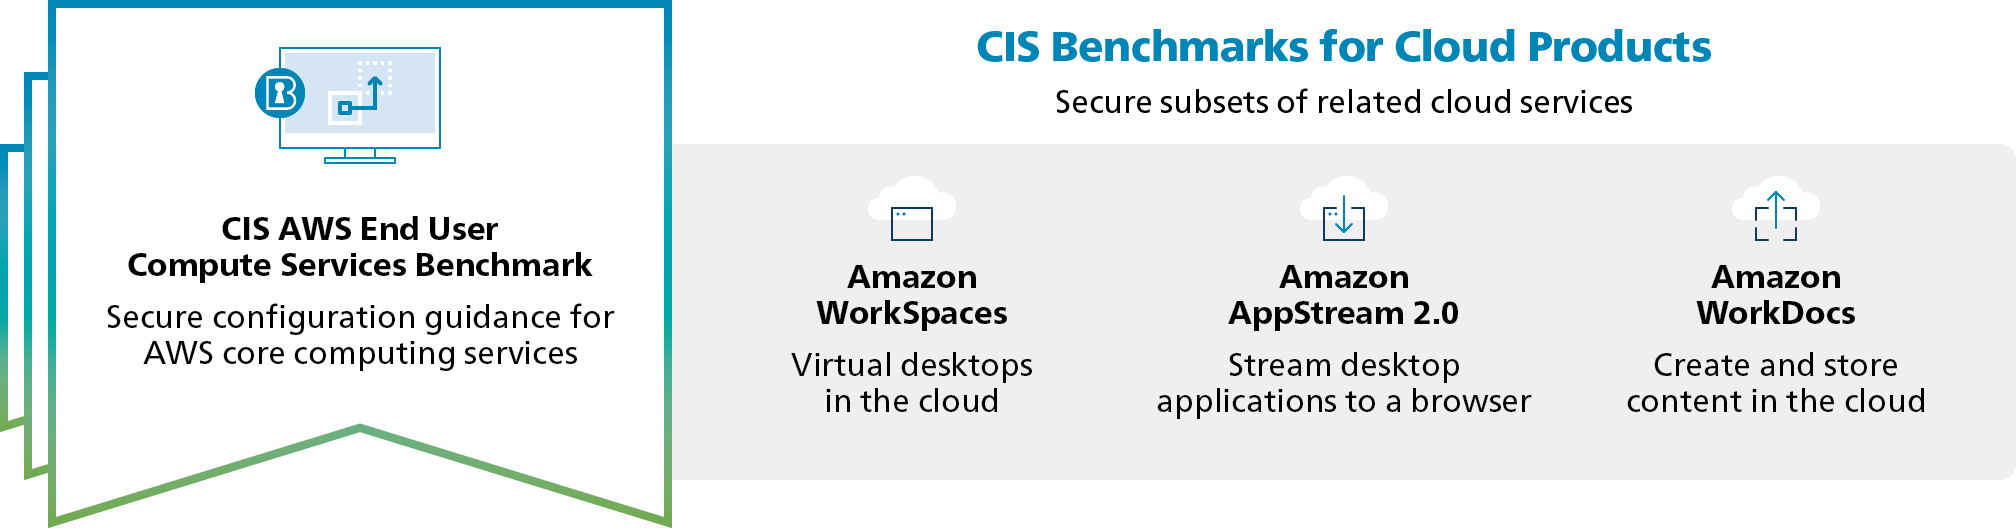 CIS-AWS_End_User_Compute_Services_Benchmarks-Cloud_Products.png